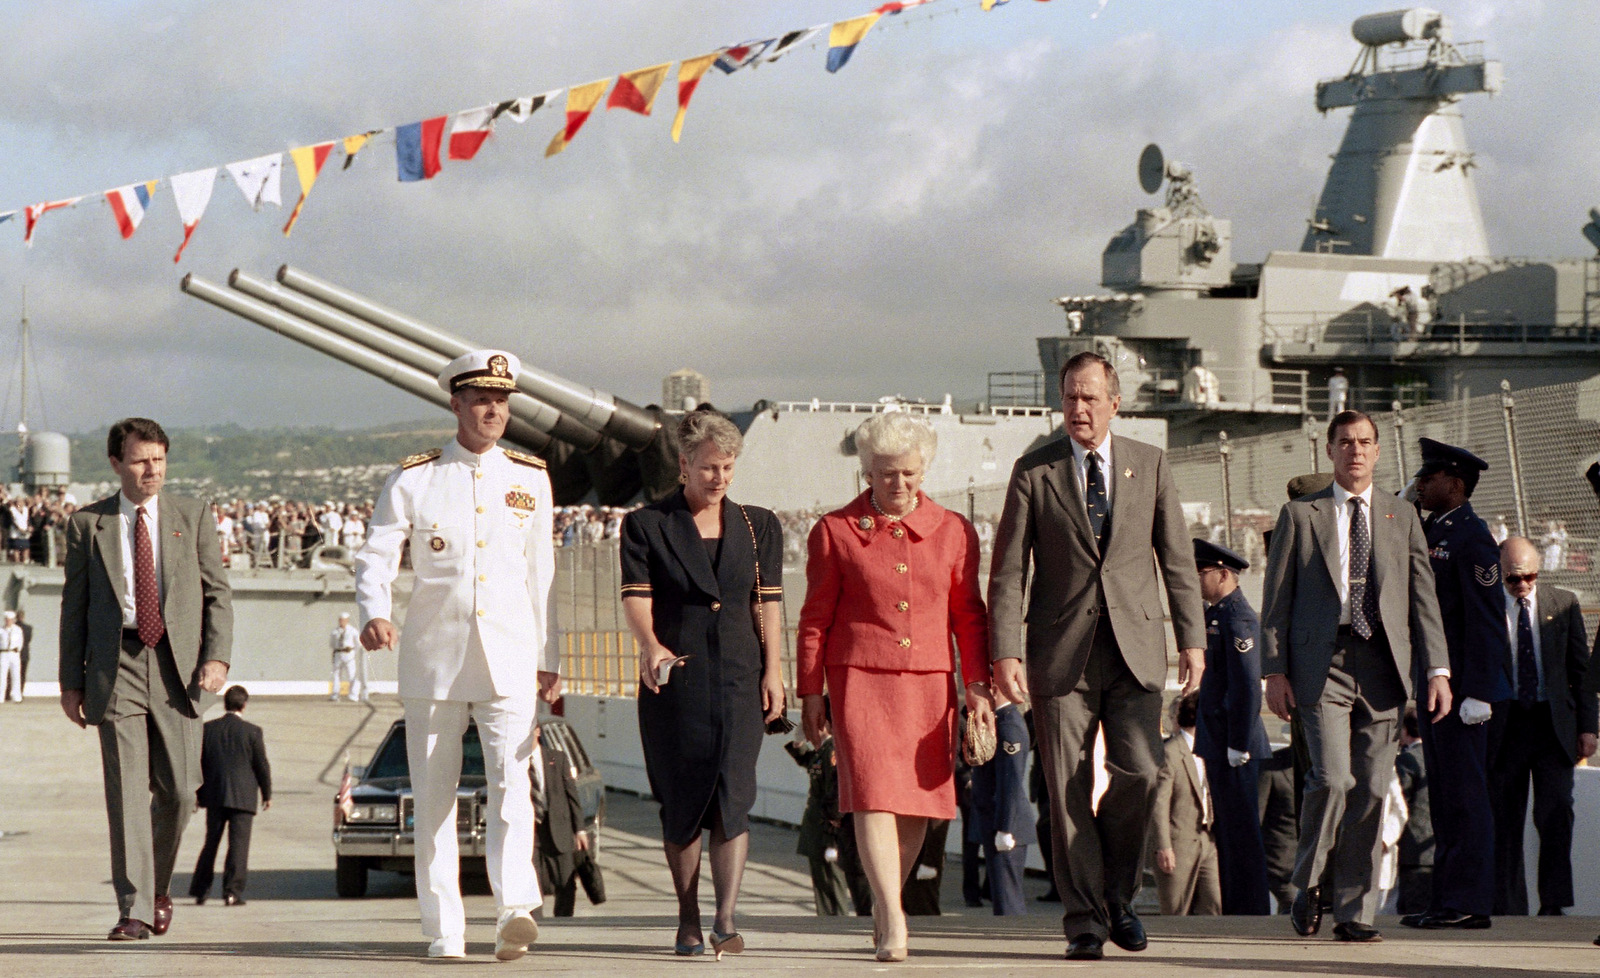 President George H.W. Bush and Mrs. Barbara Bush are escorted along a Navy pier past the battleship USS Missouri by Admiral Charles Larson, Commander of Pacific Forces, and his wife Sally, in Pearl Harbor, Hawaii on Dec. 7, 1991. Bush was walking to a podium to address Pearl Harbor survivors and military personnel. (AP/Ron Edmonds)